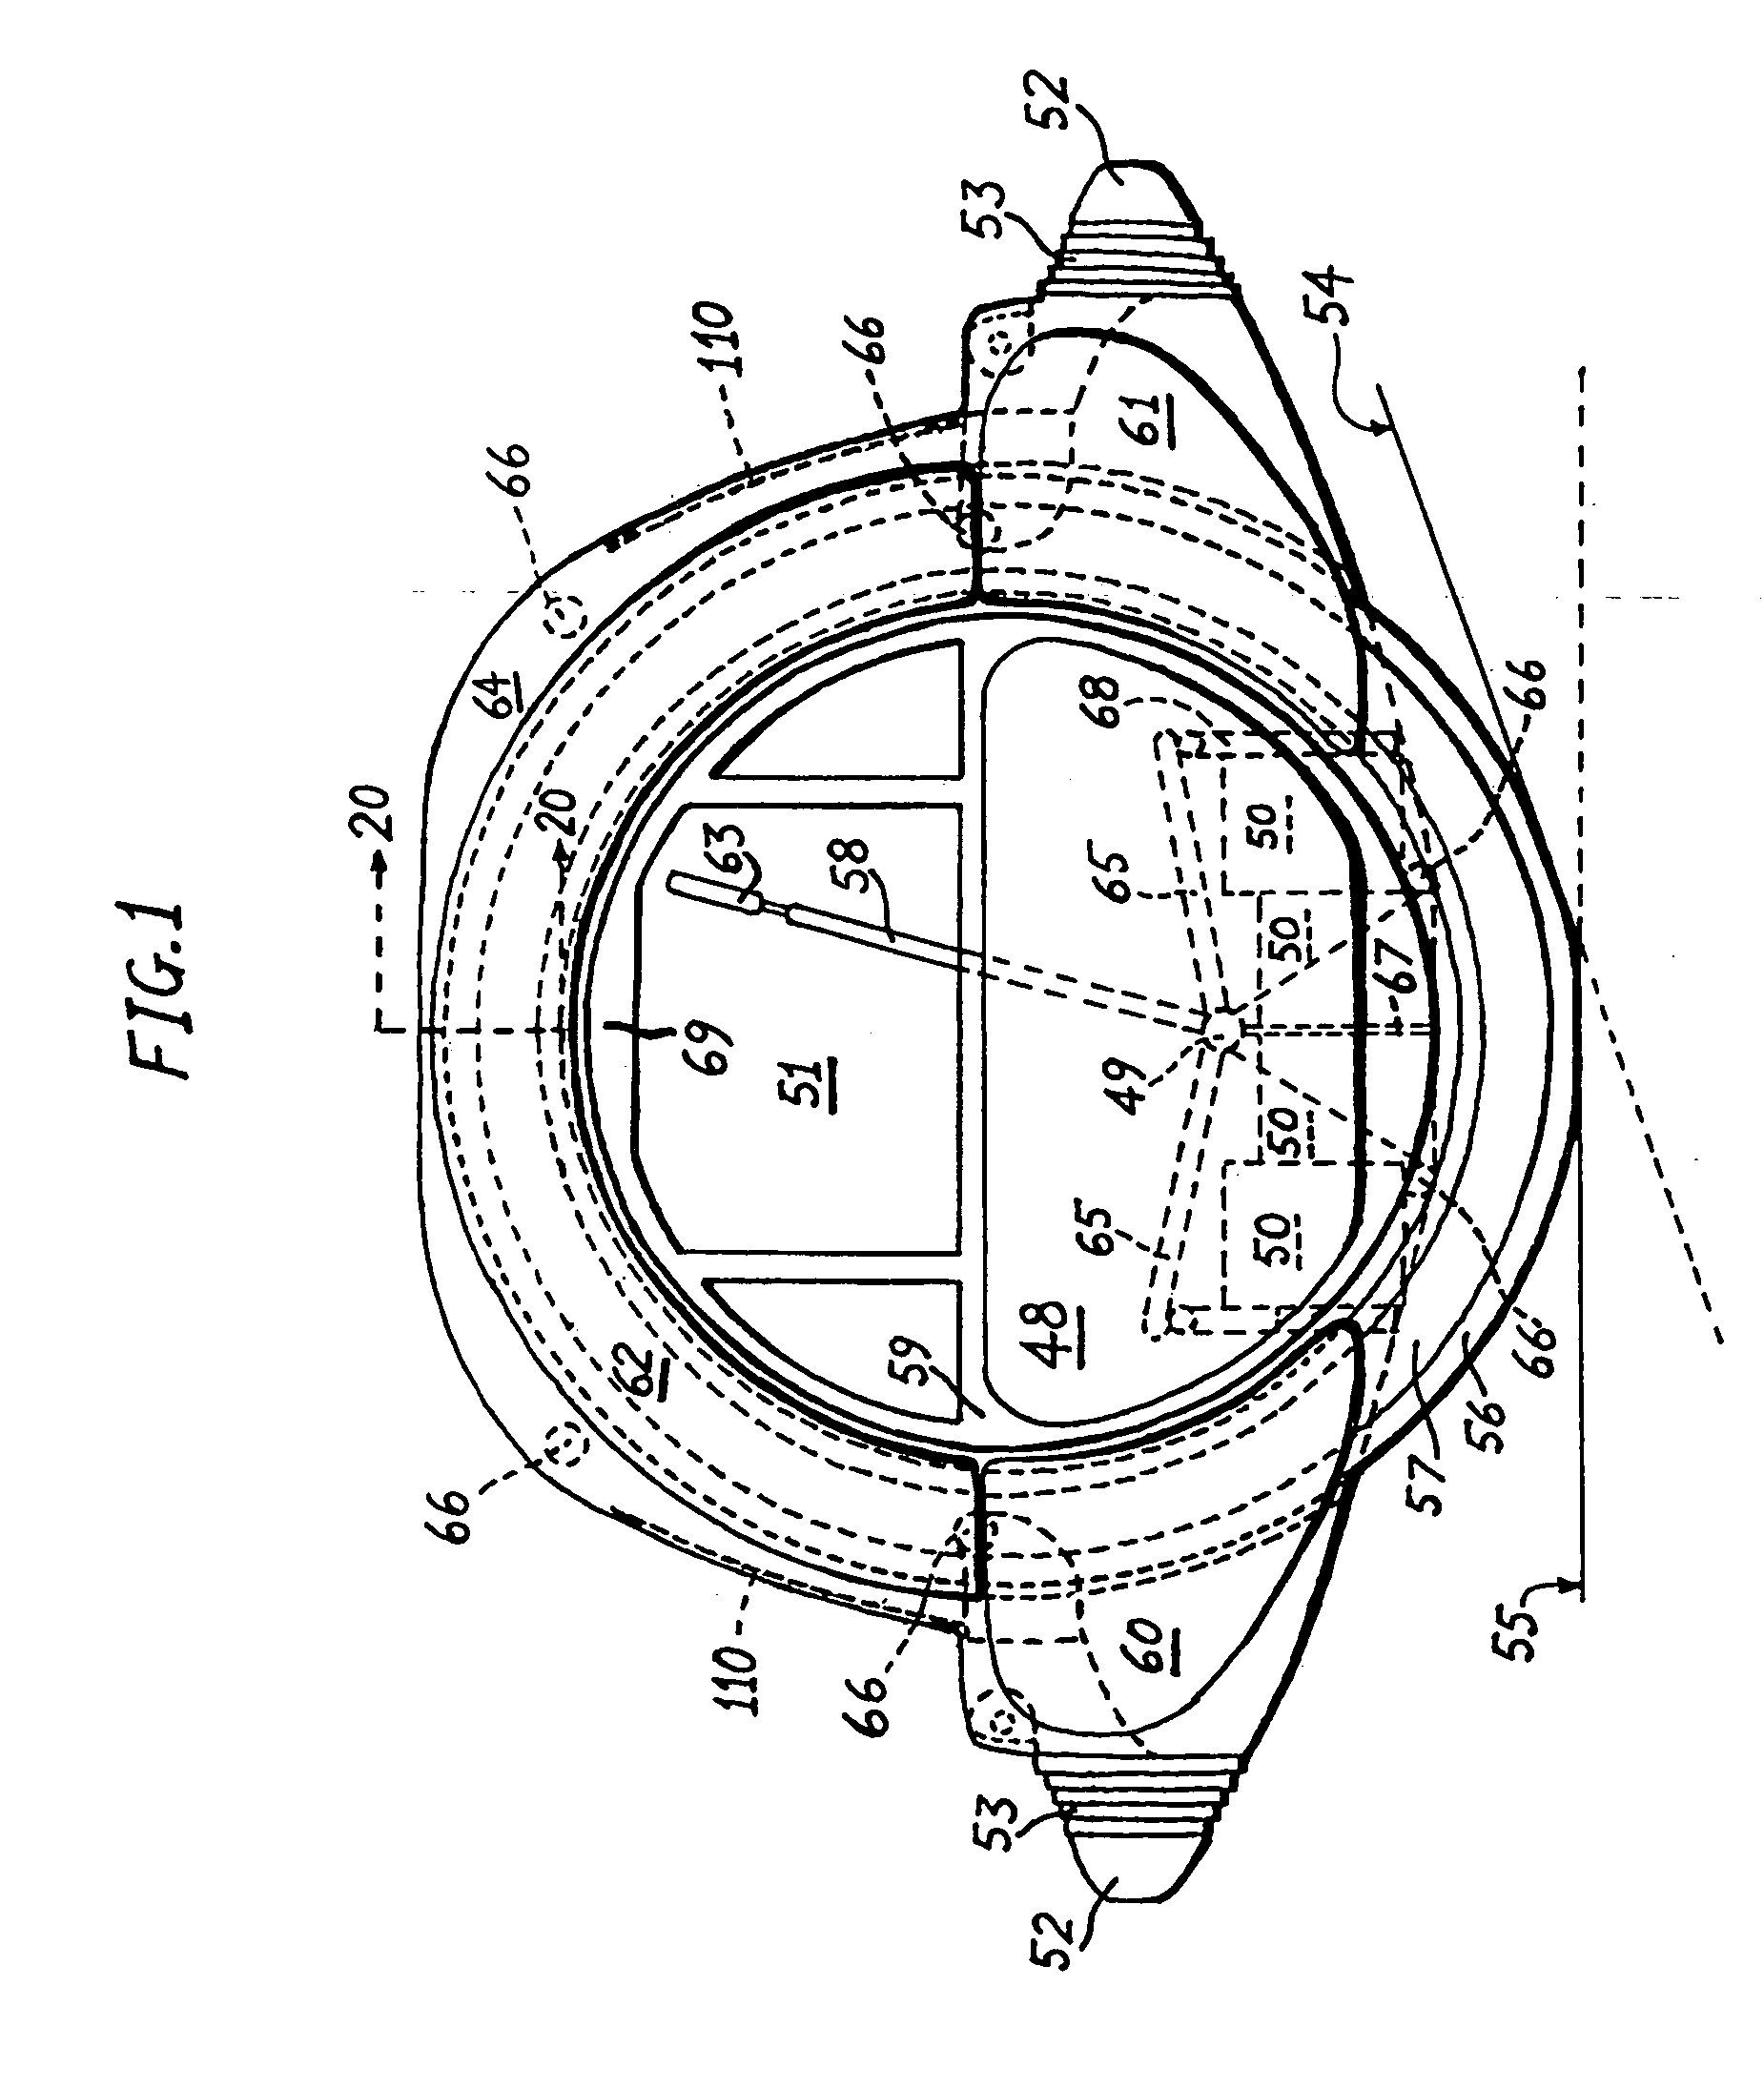 Two-parallel-wheeled electric motor vehicle with a provision for connecting electromagnetic holonomic wheels in tandem